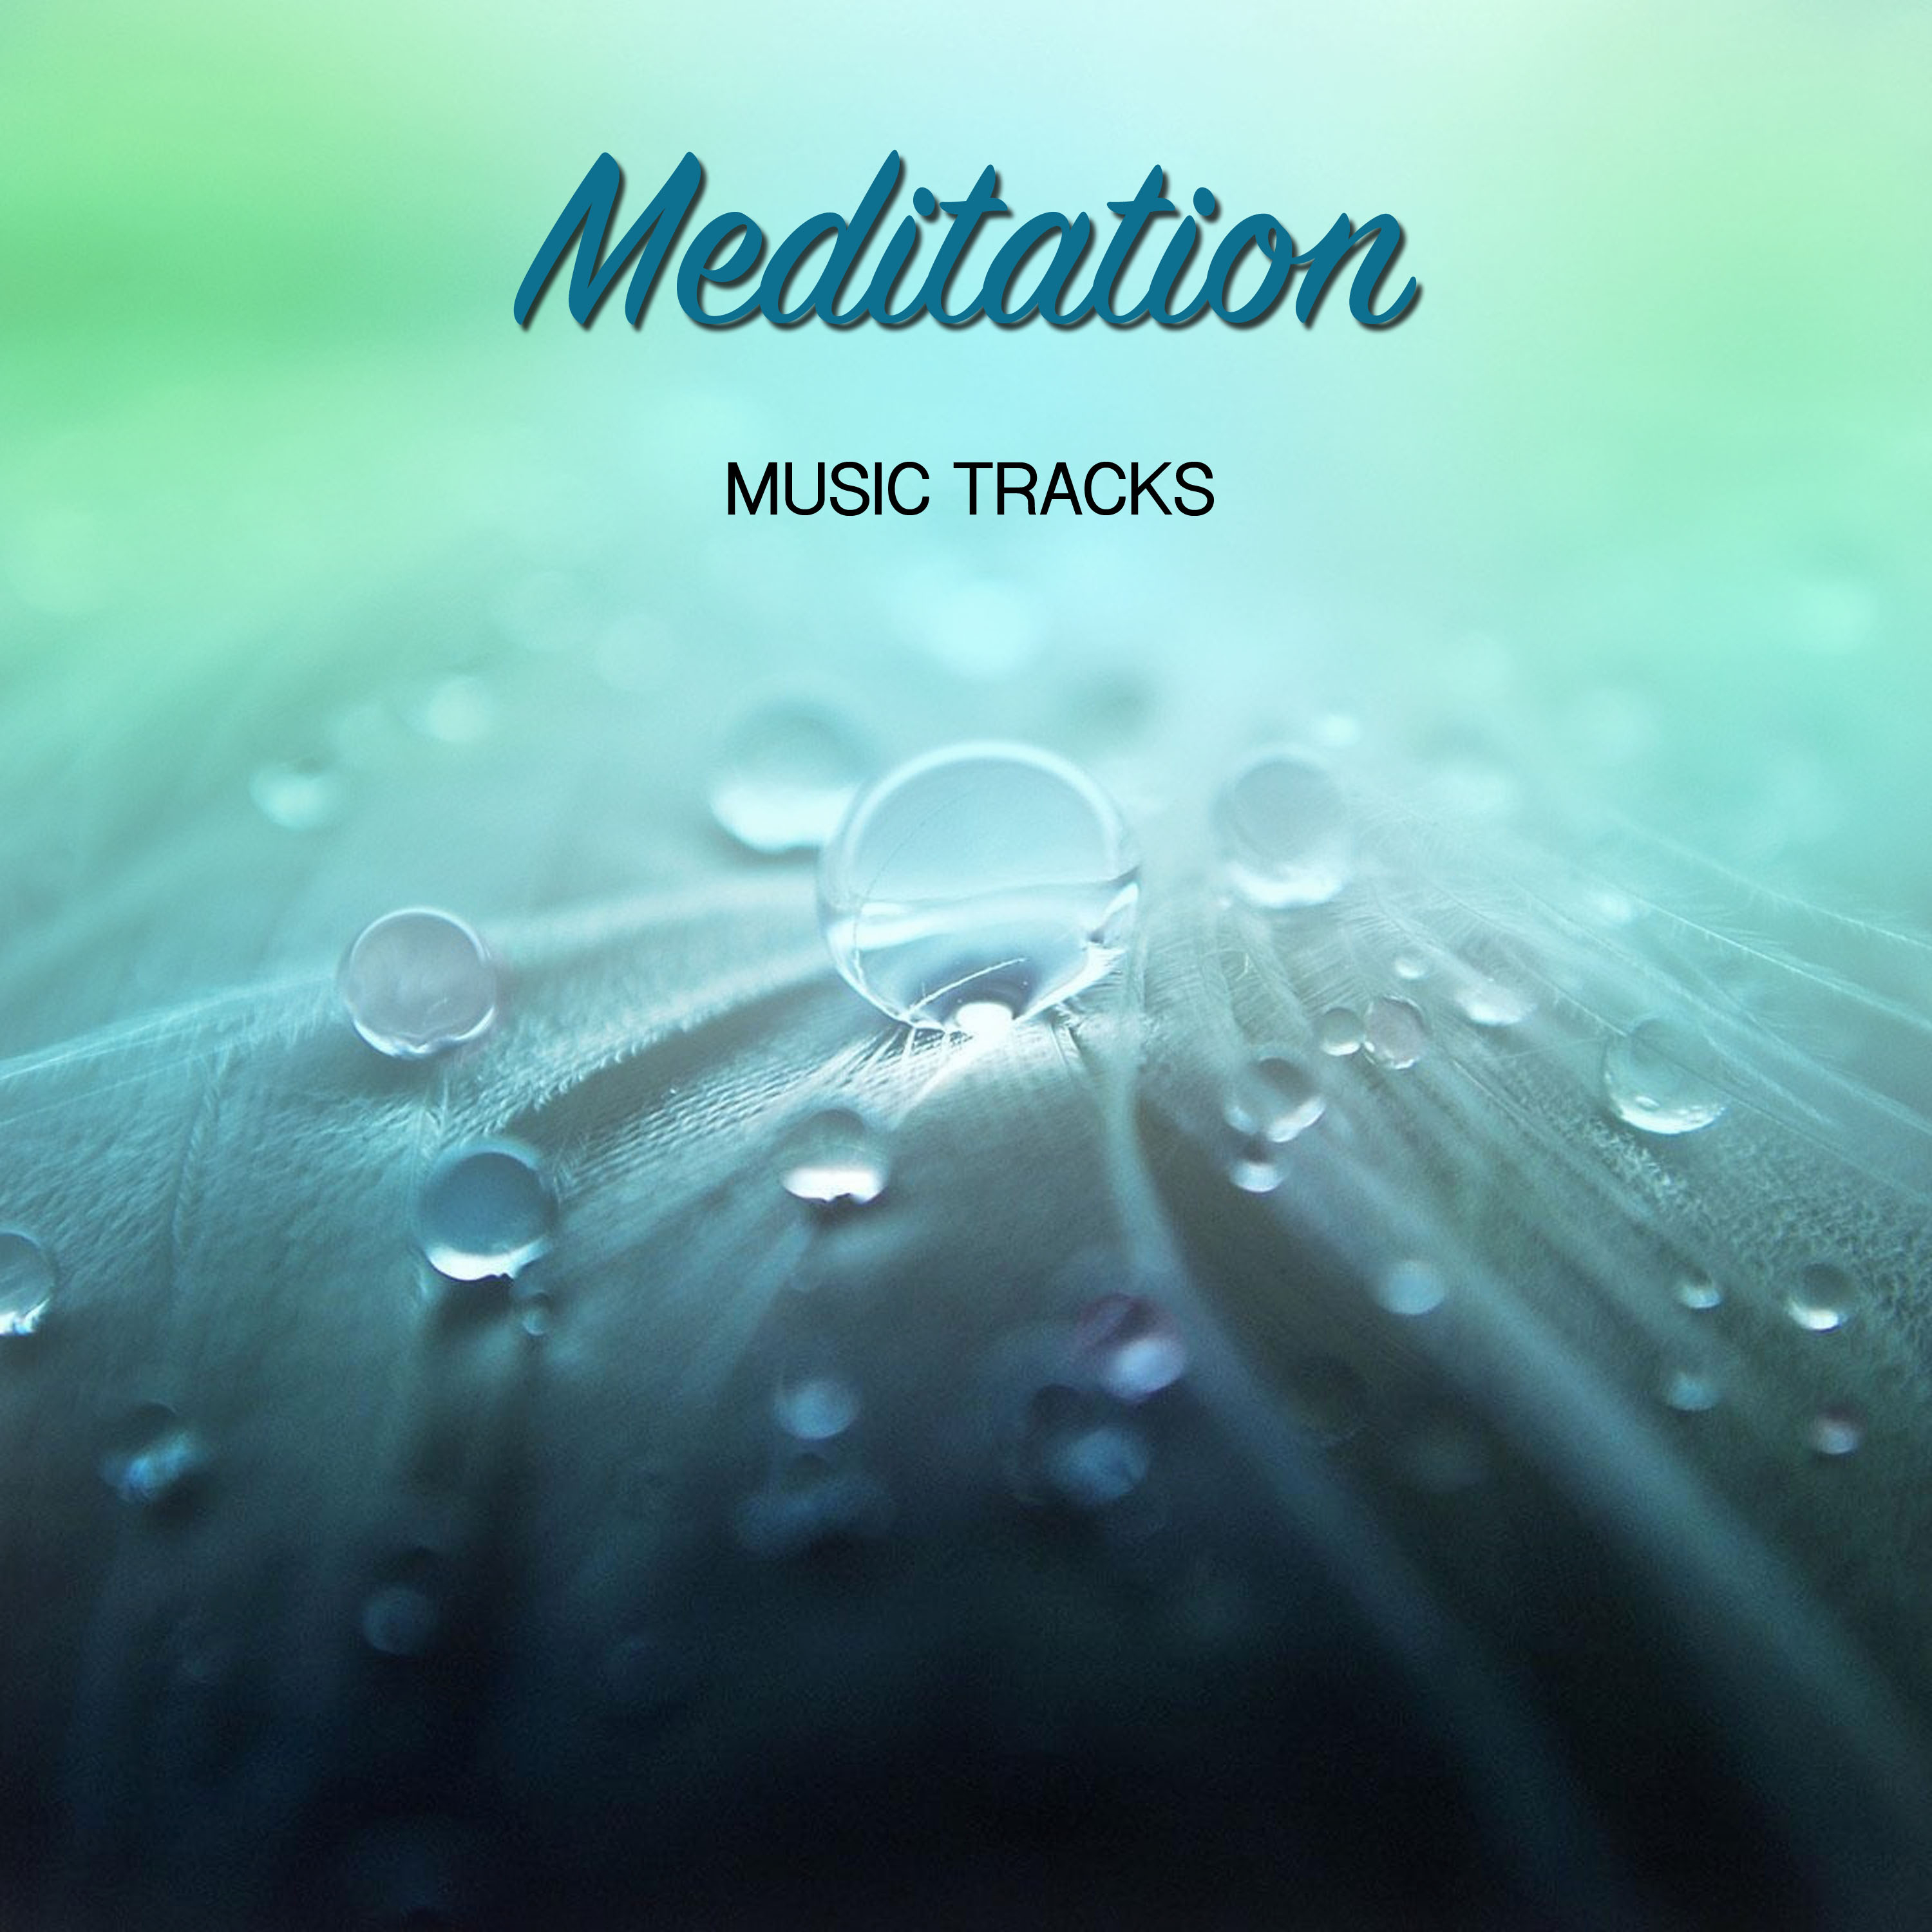 15 Music Tracks for Mediation and Relaxation